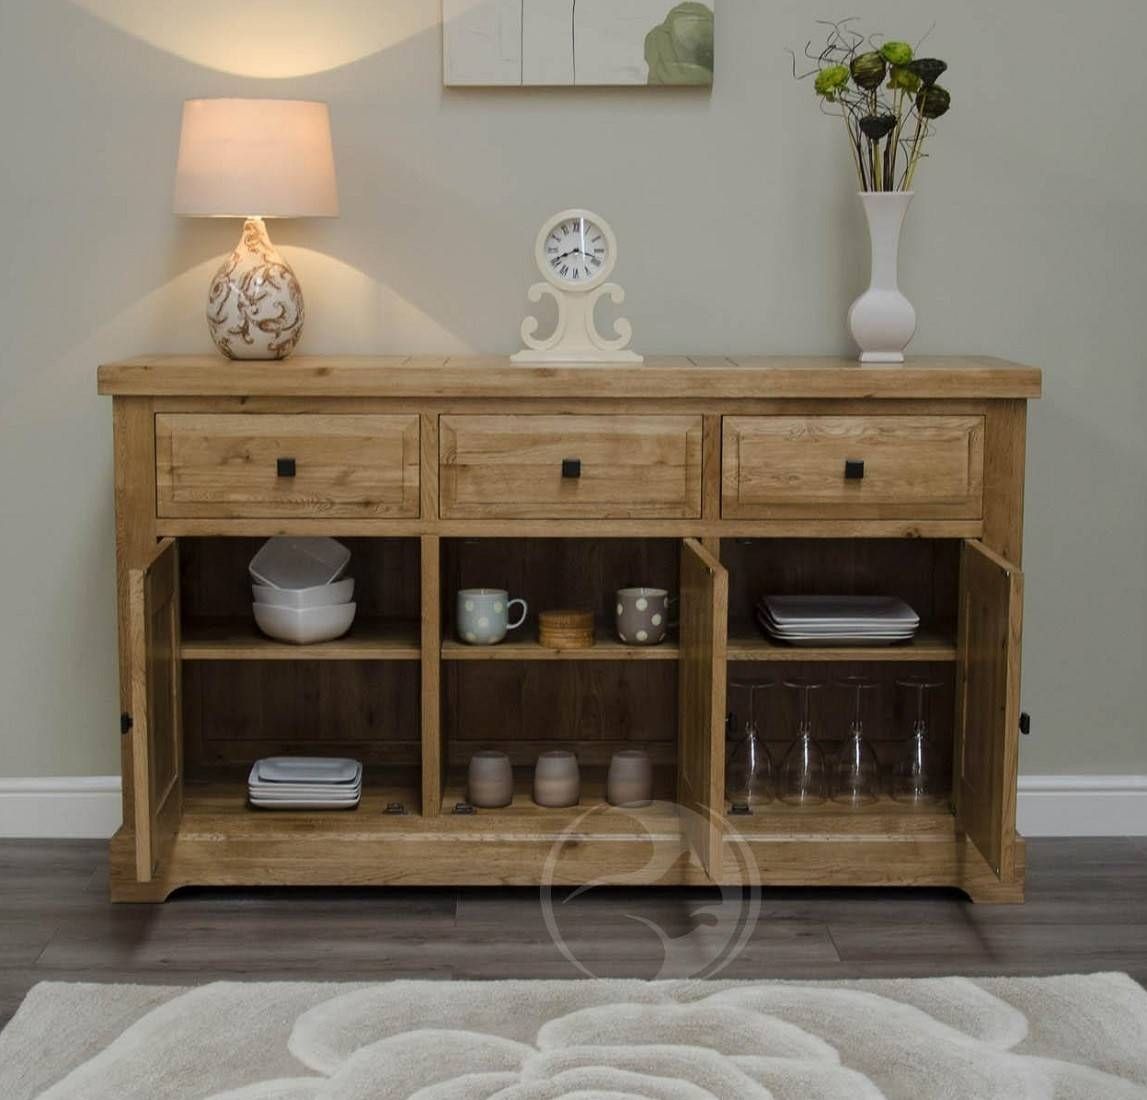 Coniston Rustic Solid Oak Large Sideboard | Oak Furniture Uk With Regard To Most Popular Rustic Oak Large Sideboards (View 8 of 15)